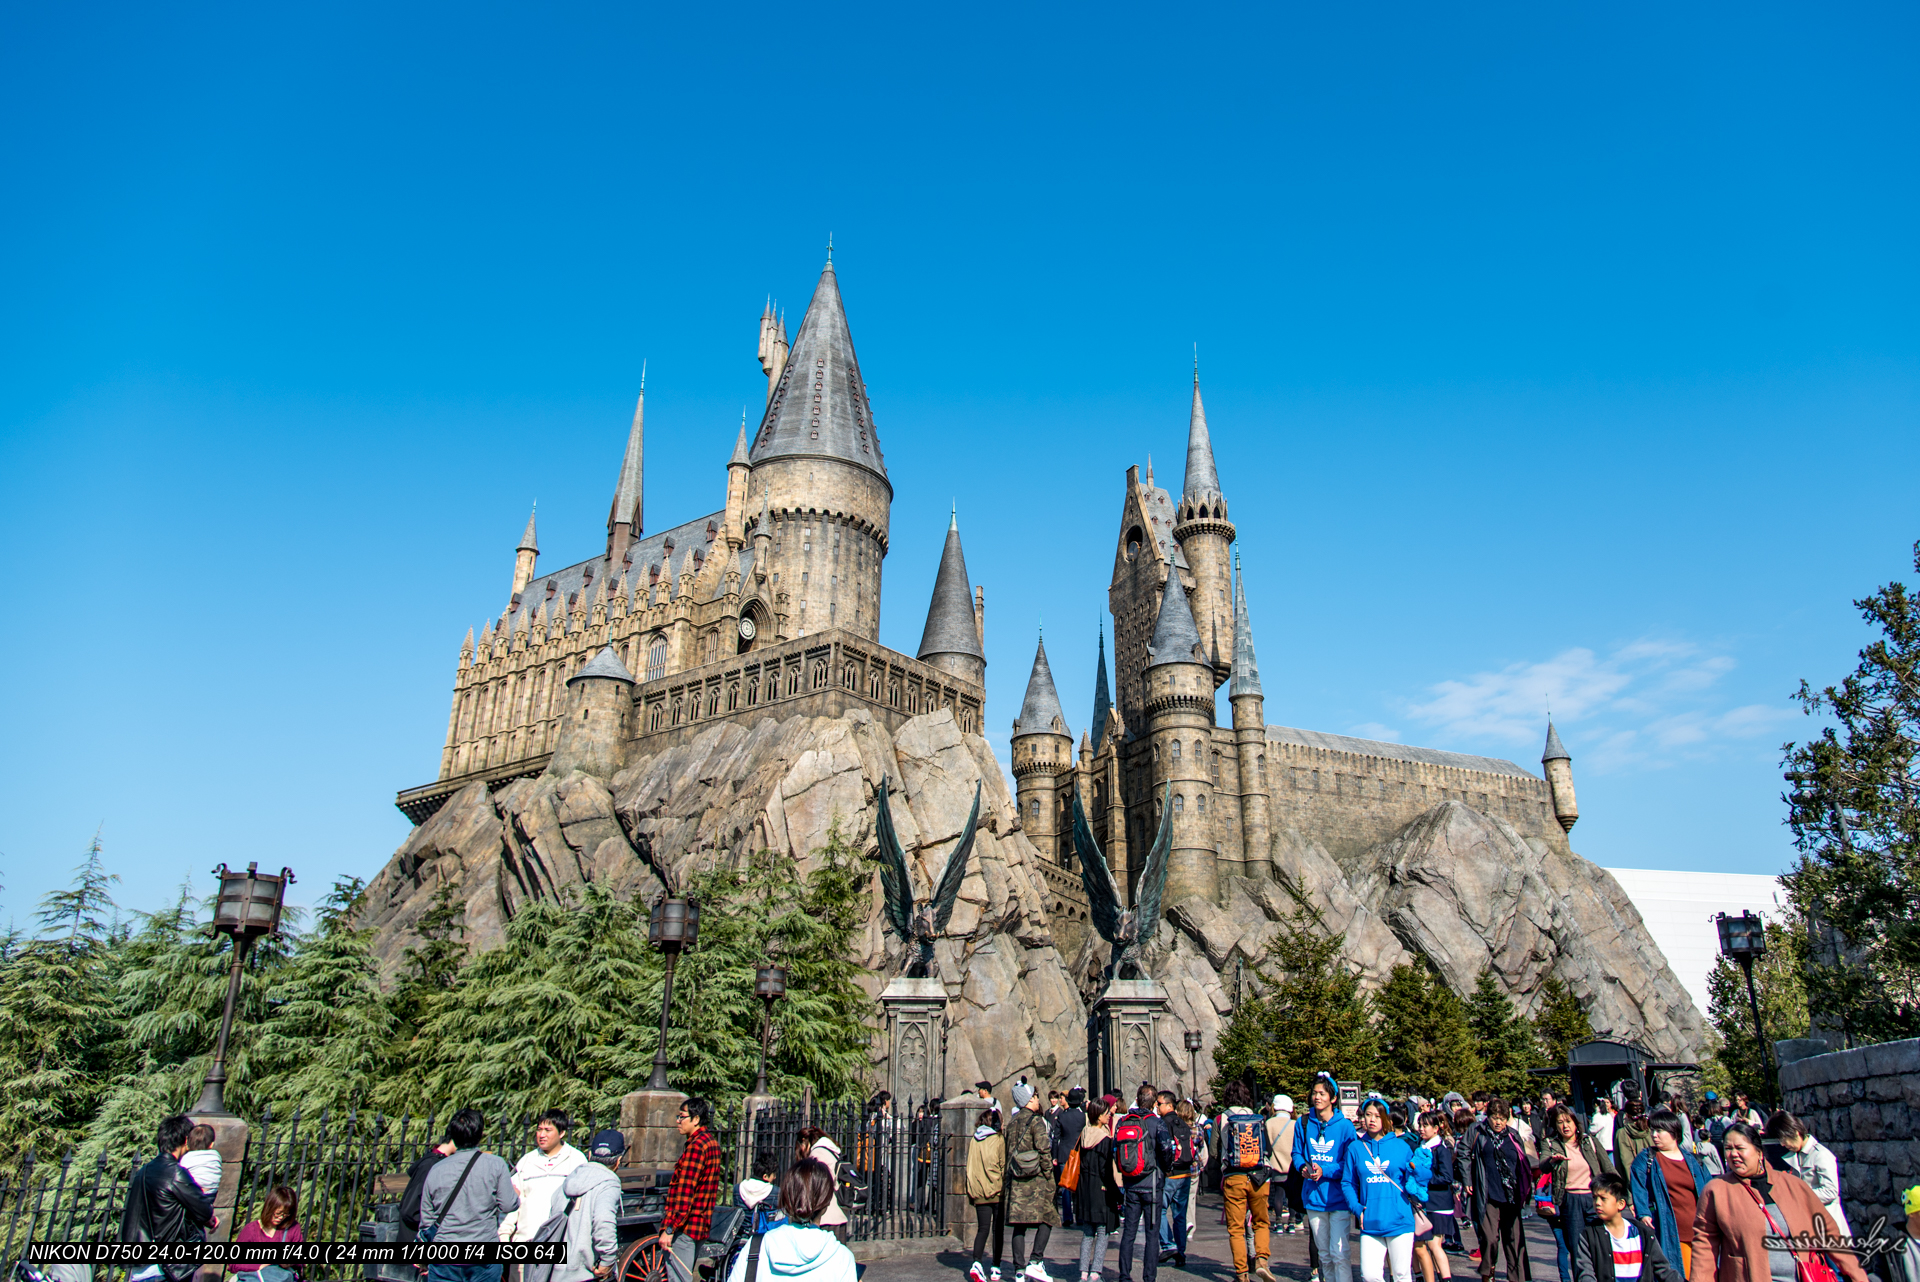 HOGWARTS SCHOOL OF WITCHCRAFT AND WIZARDRY ＠UNIVERSAL STUDIOS JAPAN